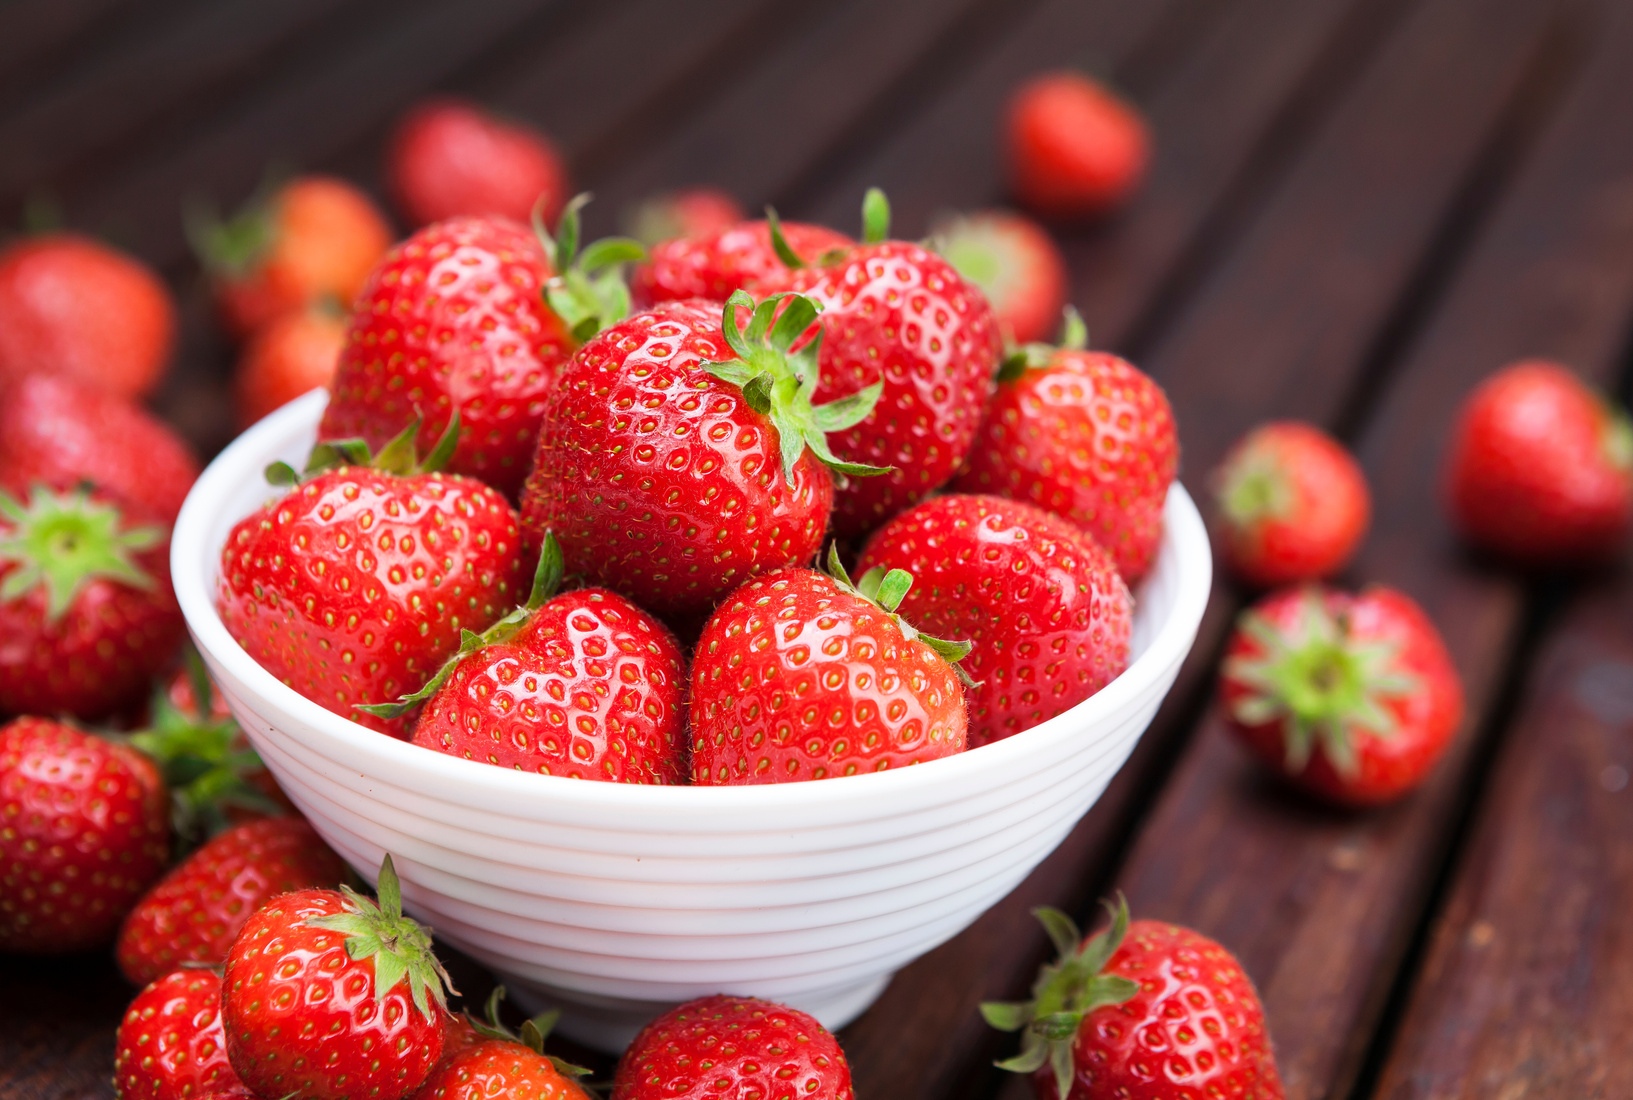 Eating Strawberry Is Good For Your Health